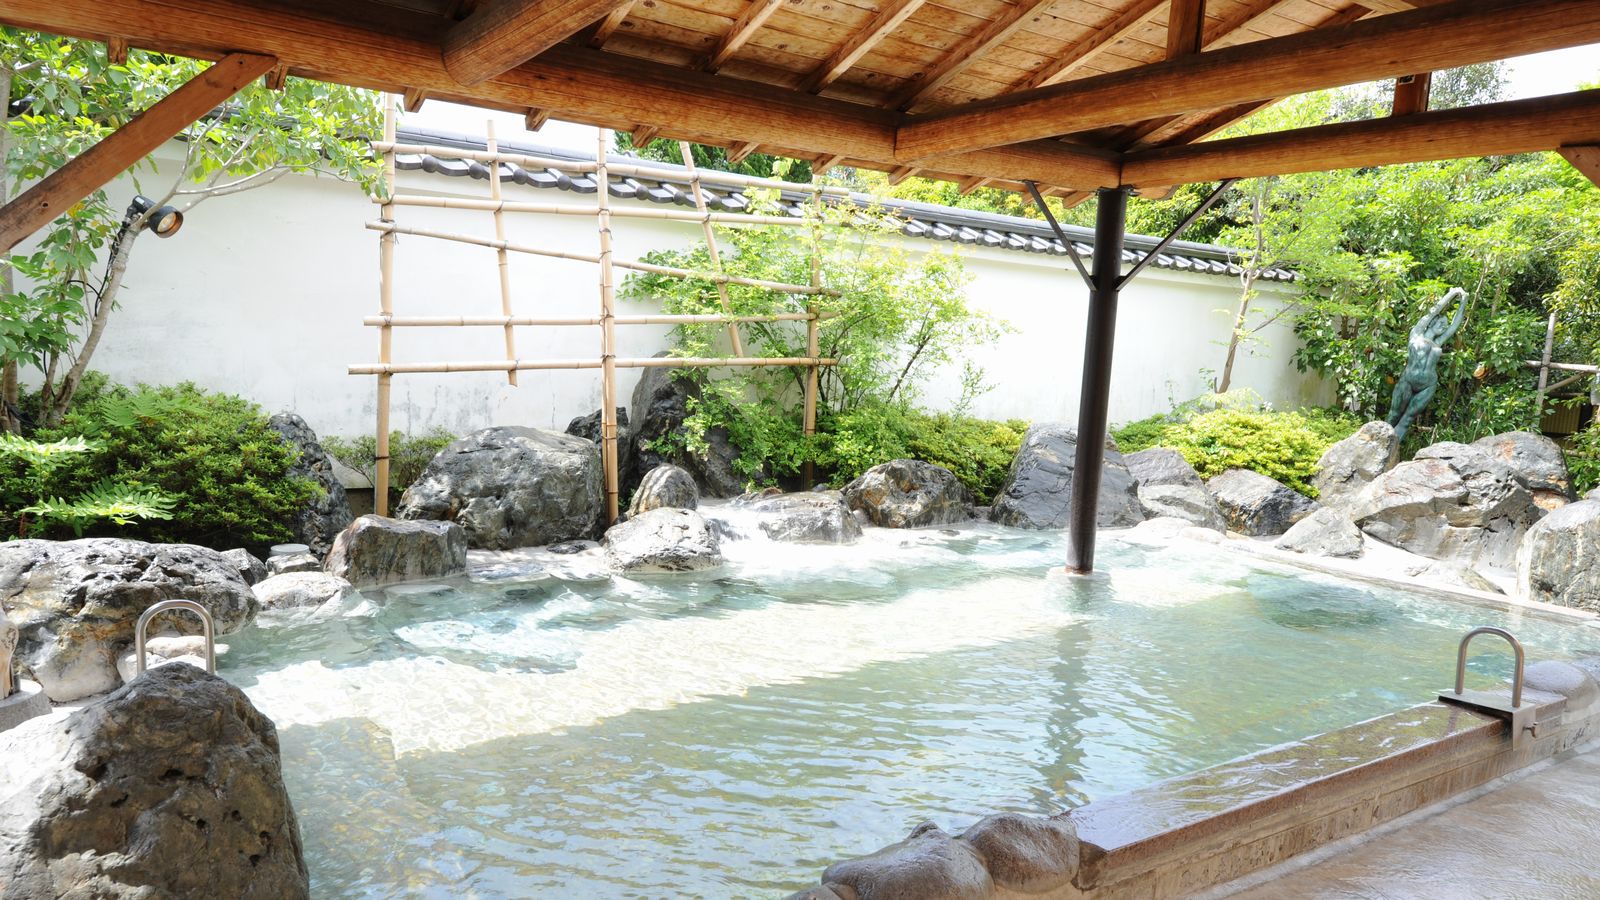 Batou Onsenkyo Nampeidai Onsen Hotel Batou Onsenkyo Nampeidai Onsen Hotel is conveniently located in the popular Nakagawa area. The property offers guests a range of services and amenities designed to provide comfort and convenience. Ser